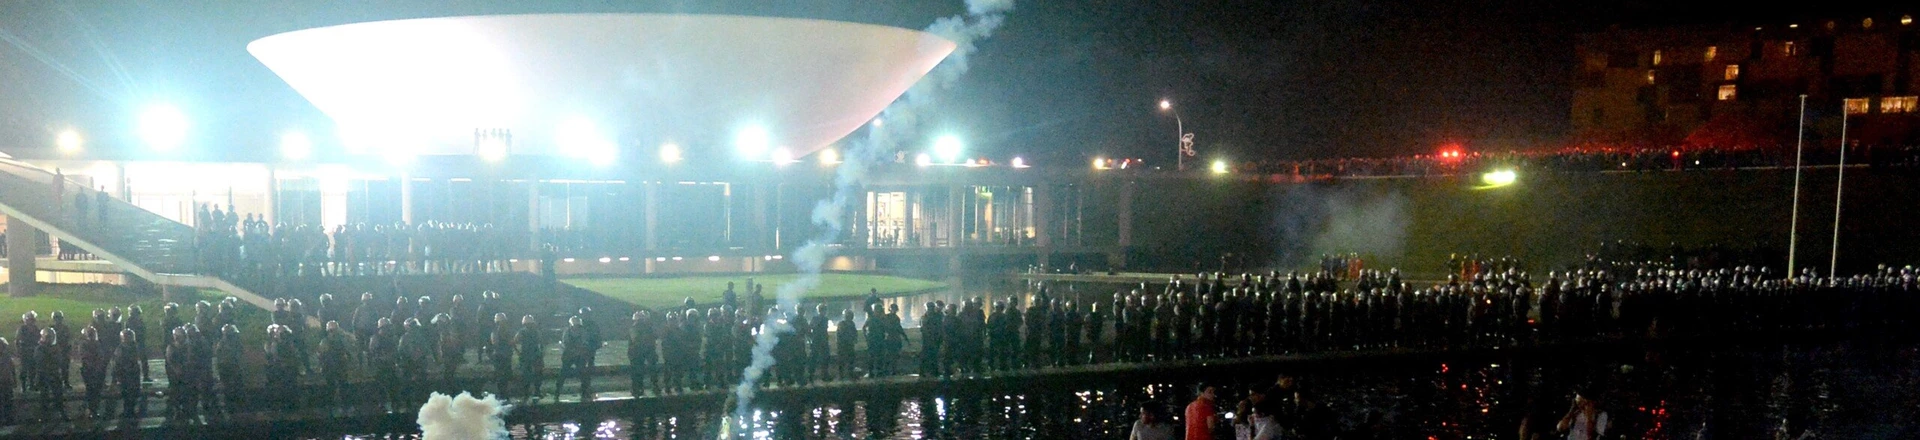 Police use tear gas against demonstrators during a protest against government waste and corruption, and the use of public funds to organize international football tournaments in front of the National Congress in Brasilia, on June 26, 2013. Brazil is currently facing unprecedented social unrest, marked by almost daily street protests to demand better public services and an end to rampant political corruption, the protests come as Brazil hosts the FIFA 2013 Confederations Cup. AFP PHOTO /        (Photo credit should read EVARISTO SA/AFP/Getty Images)